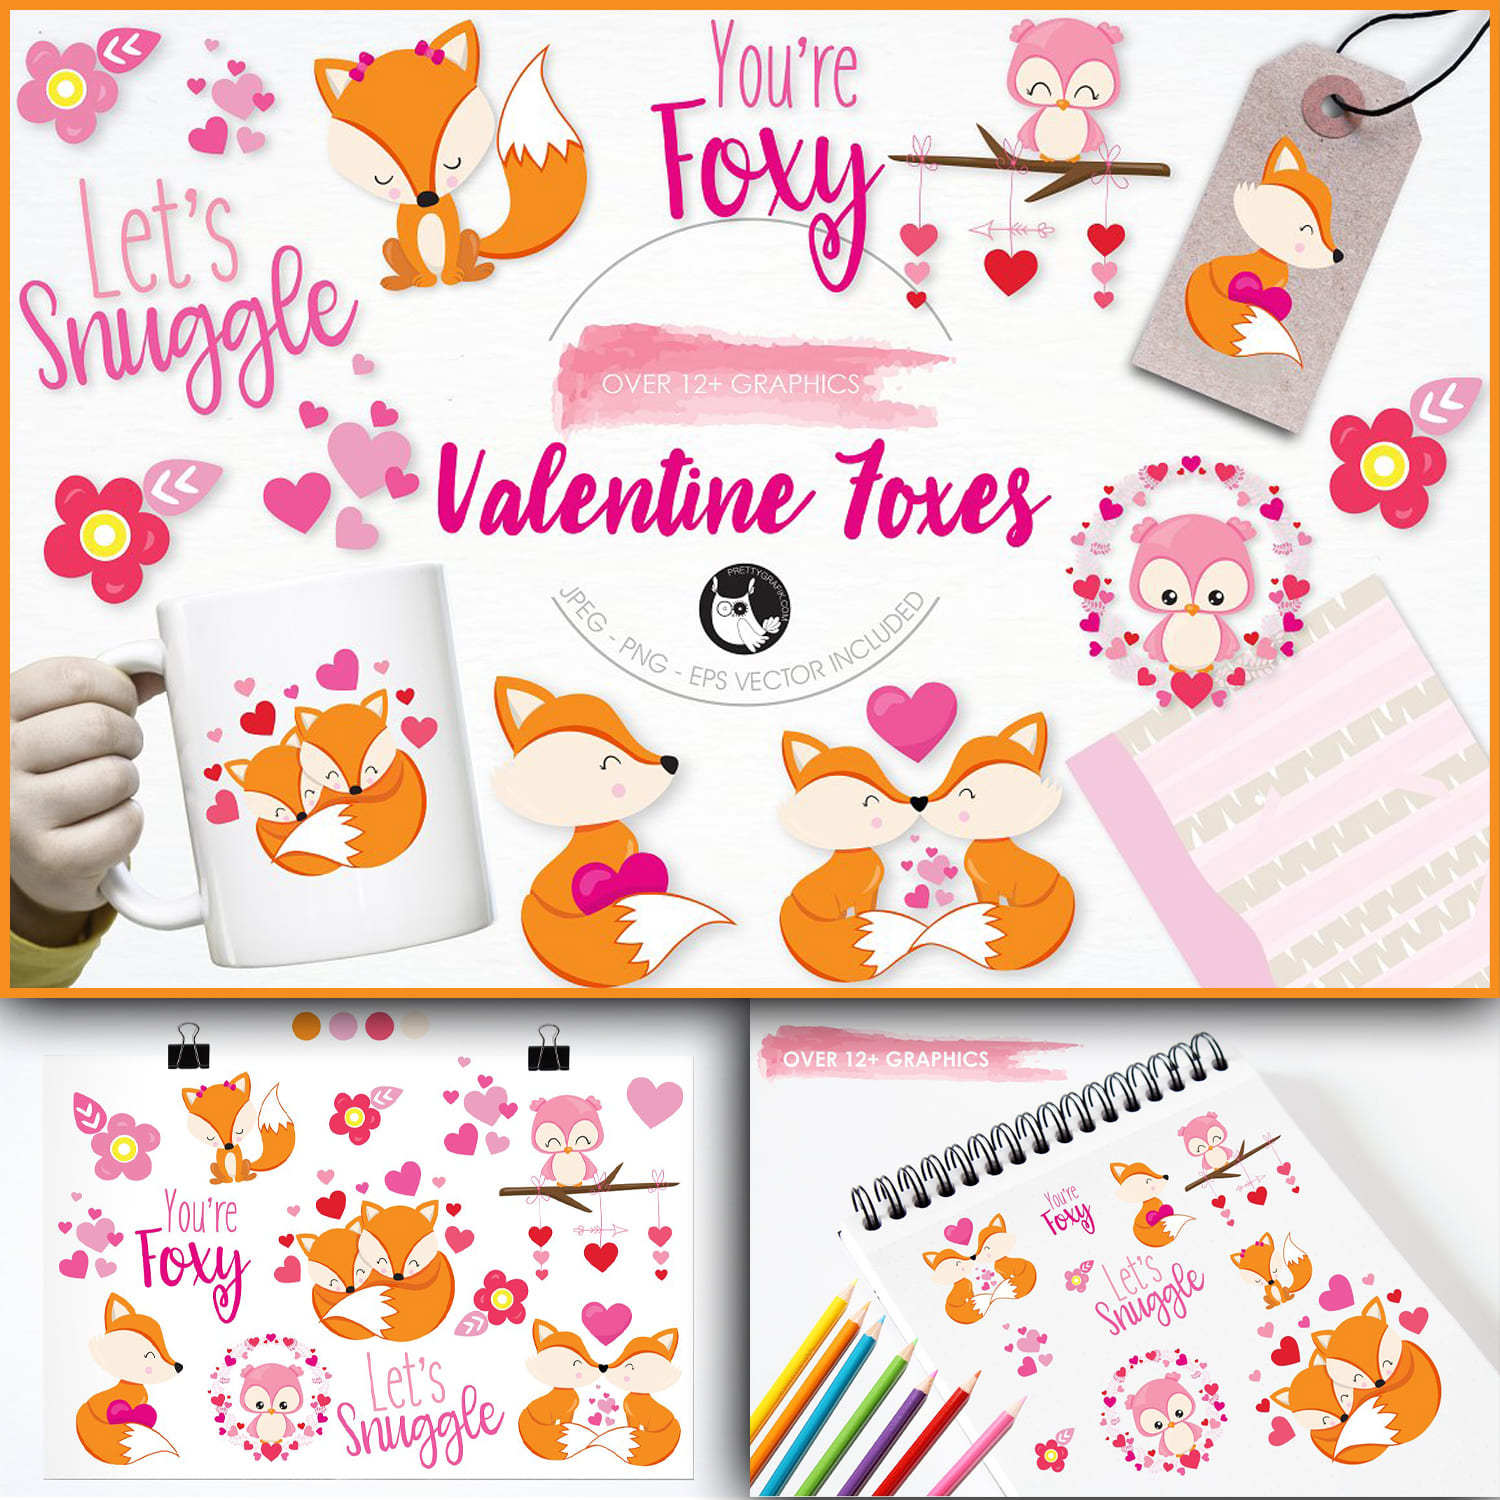 Valentine foxes illustration pack - main image preview.